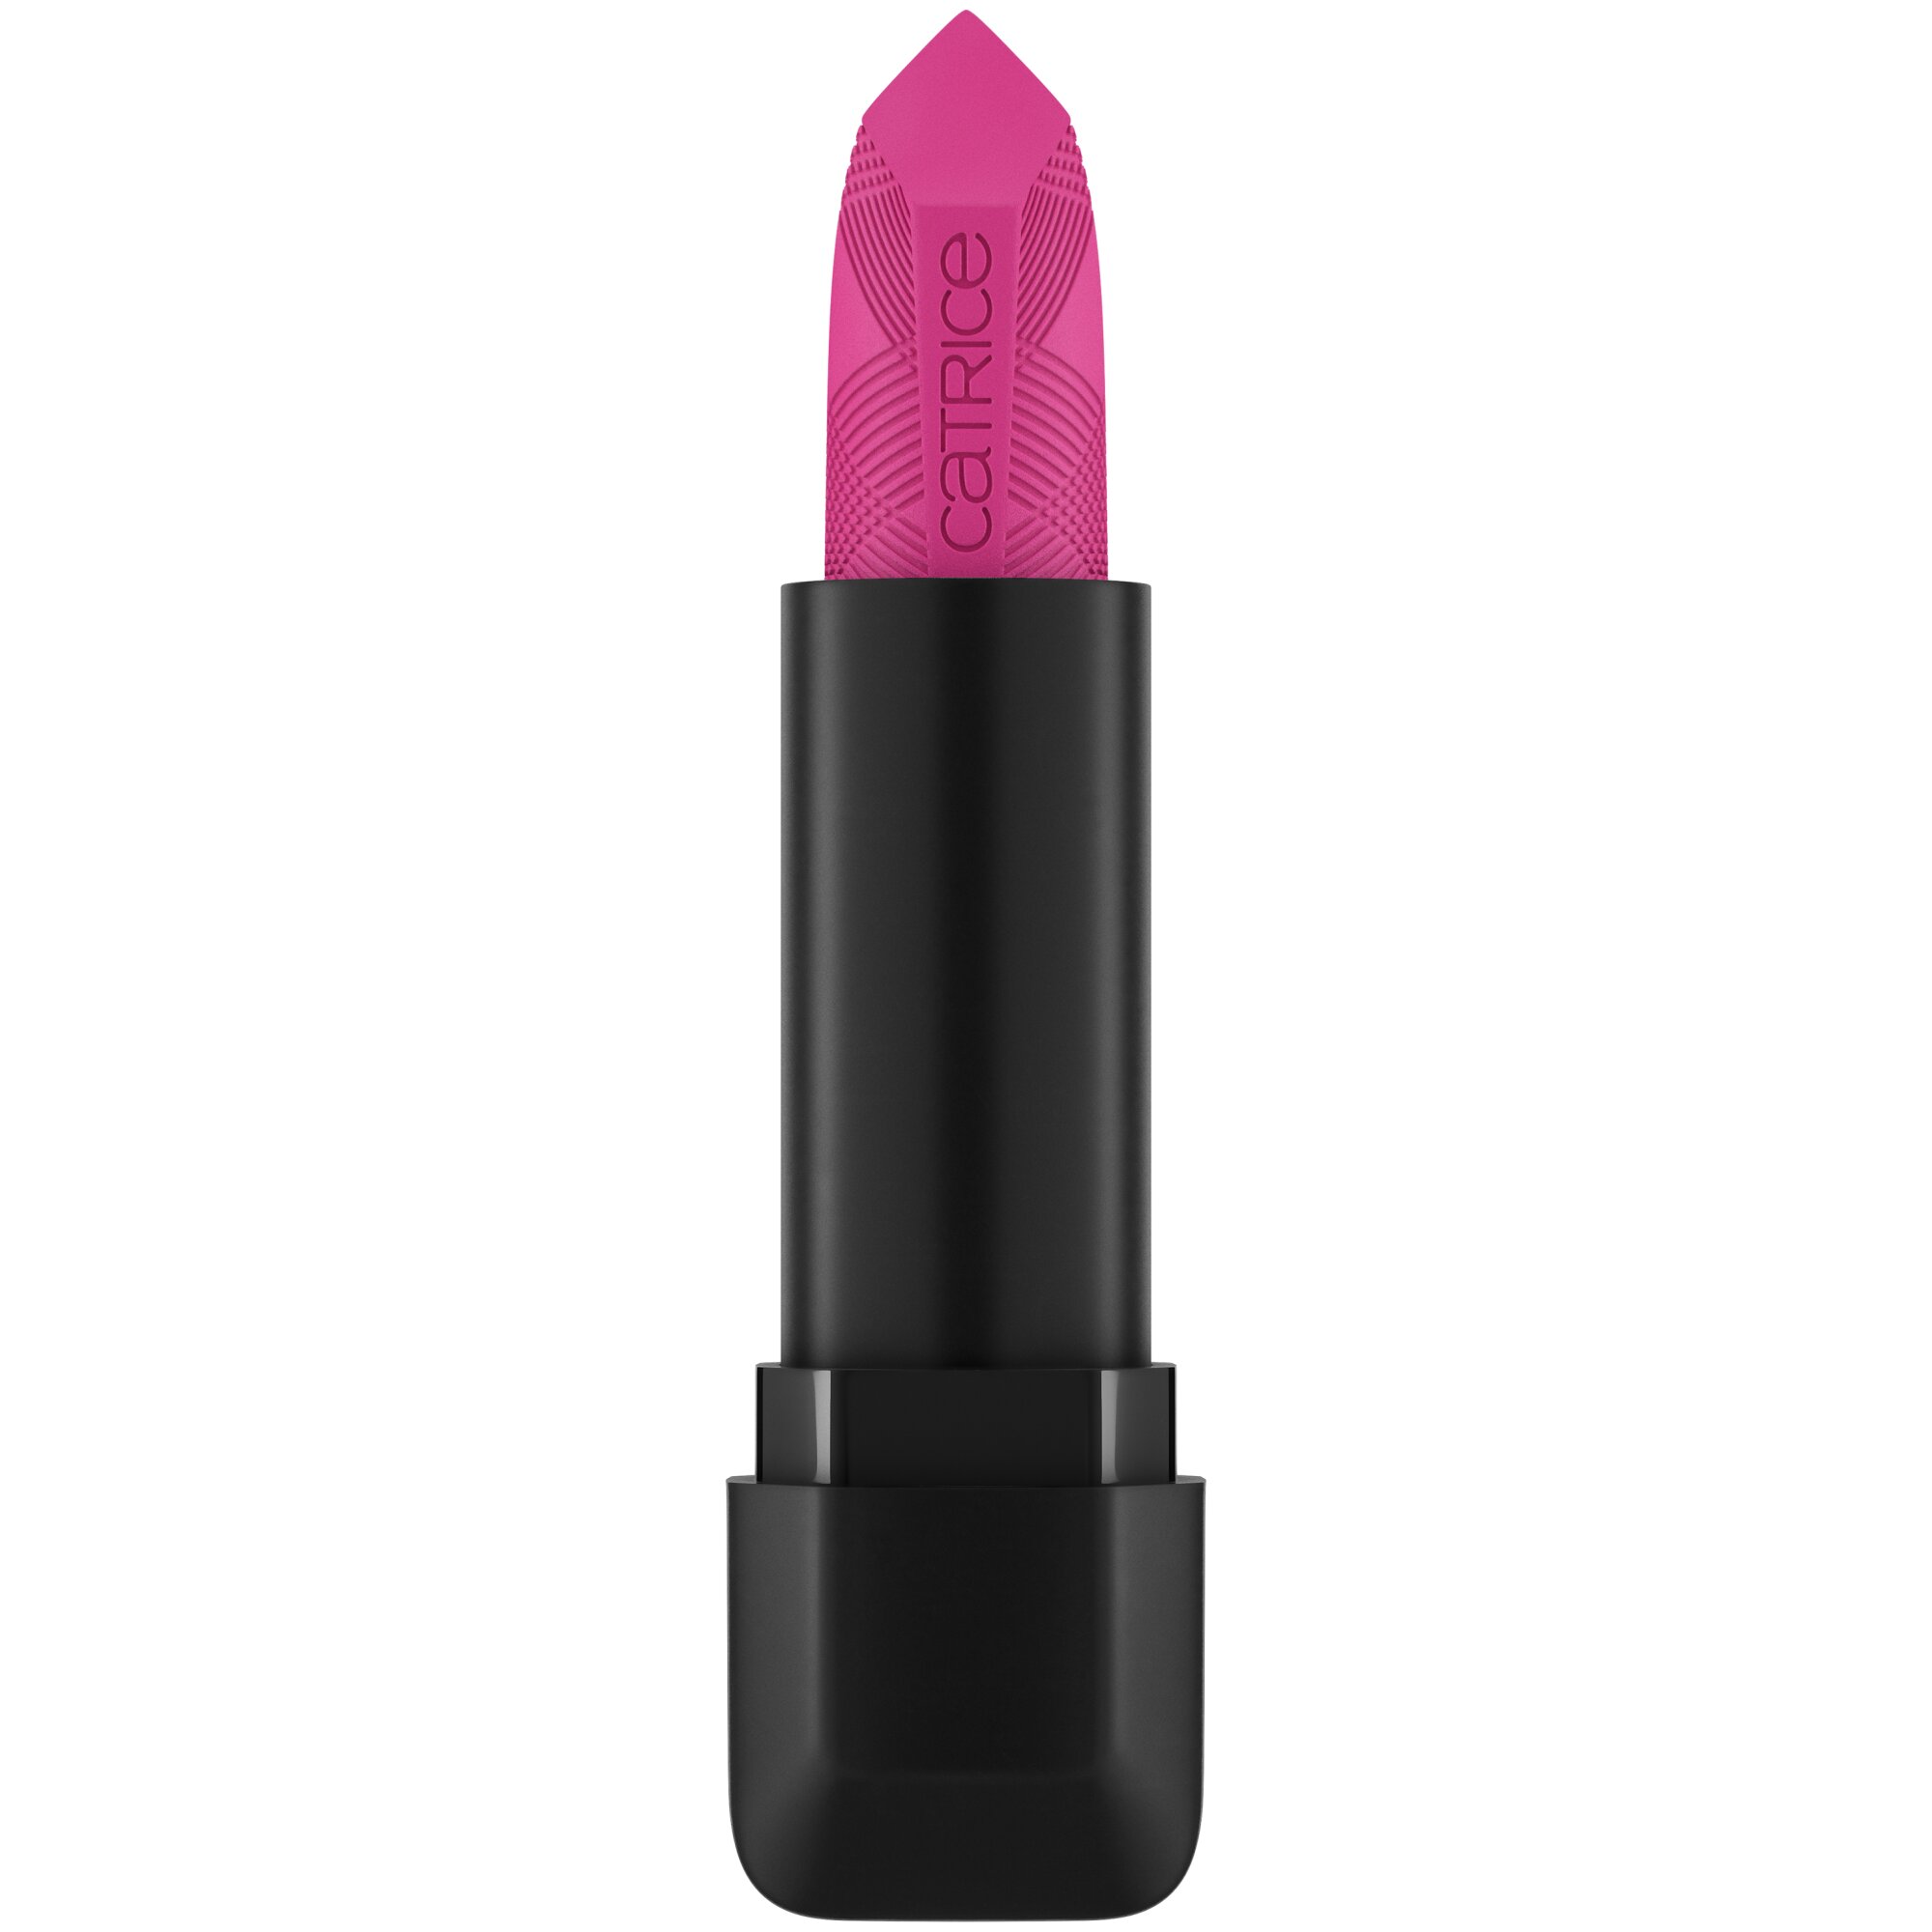 Ruj mat Scandalous Matte, 080 - Casually Overdressed, 3.5 g, Catrice